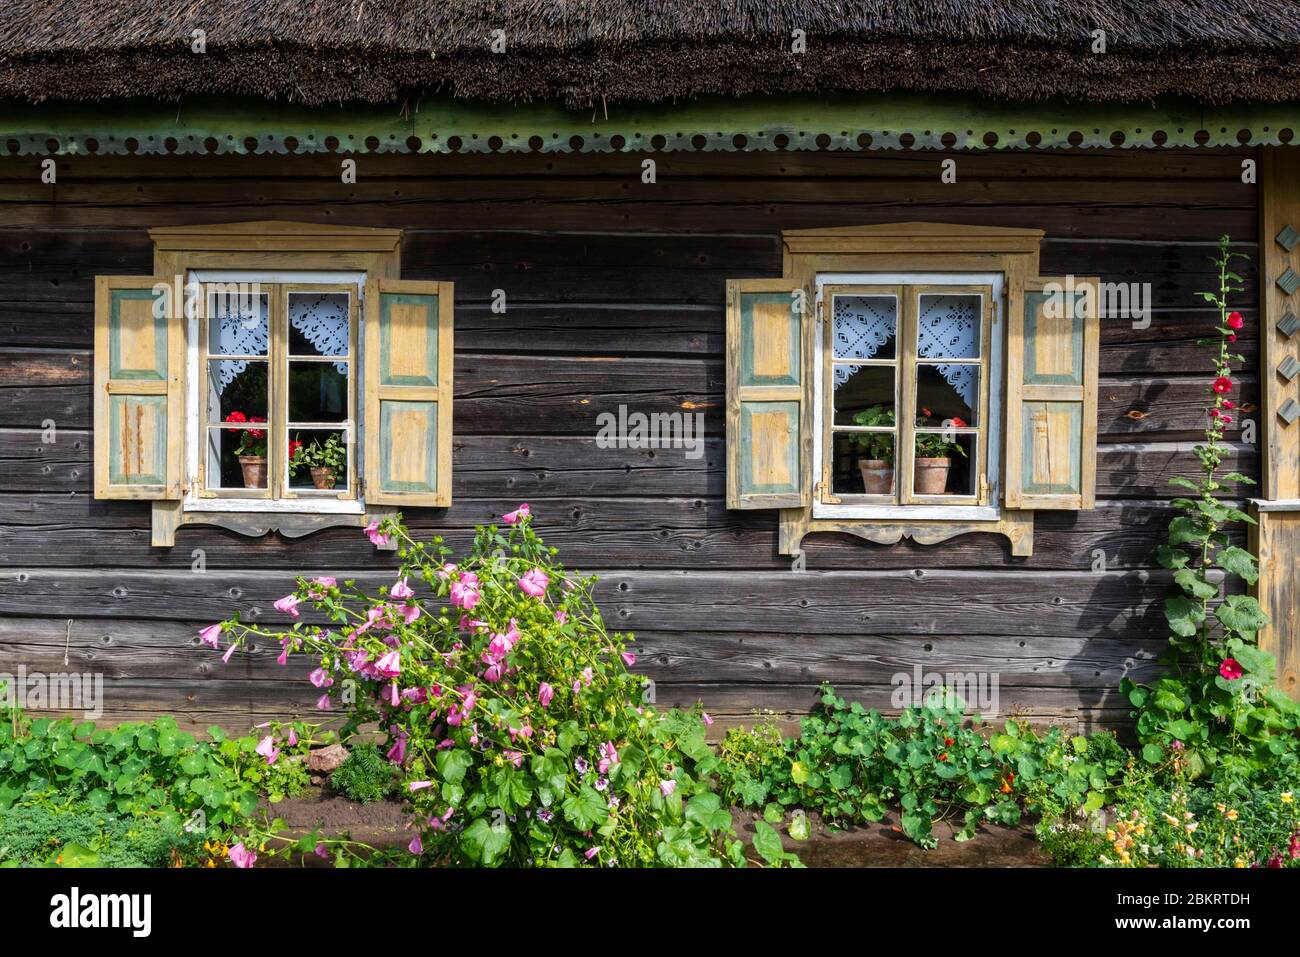 Lithuania (Baltic States), Kaunas County, Rumsiskes, ethnographic museum Stock Photo